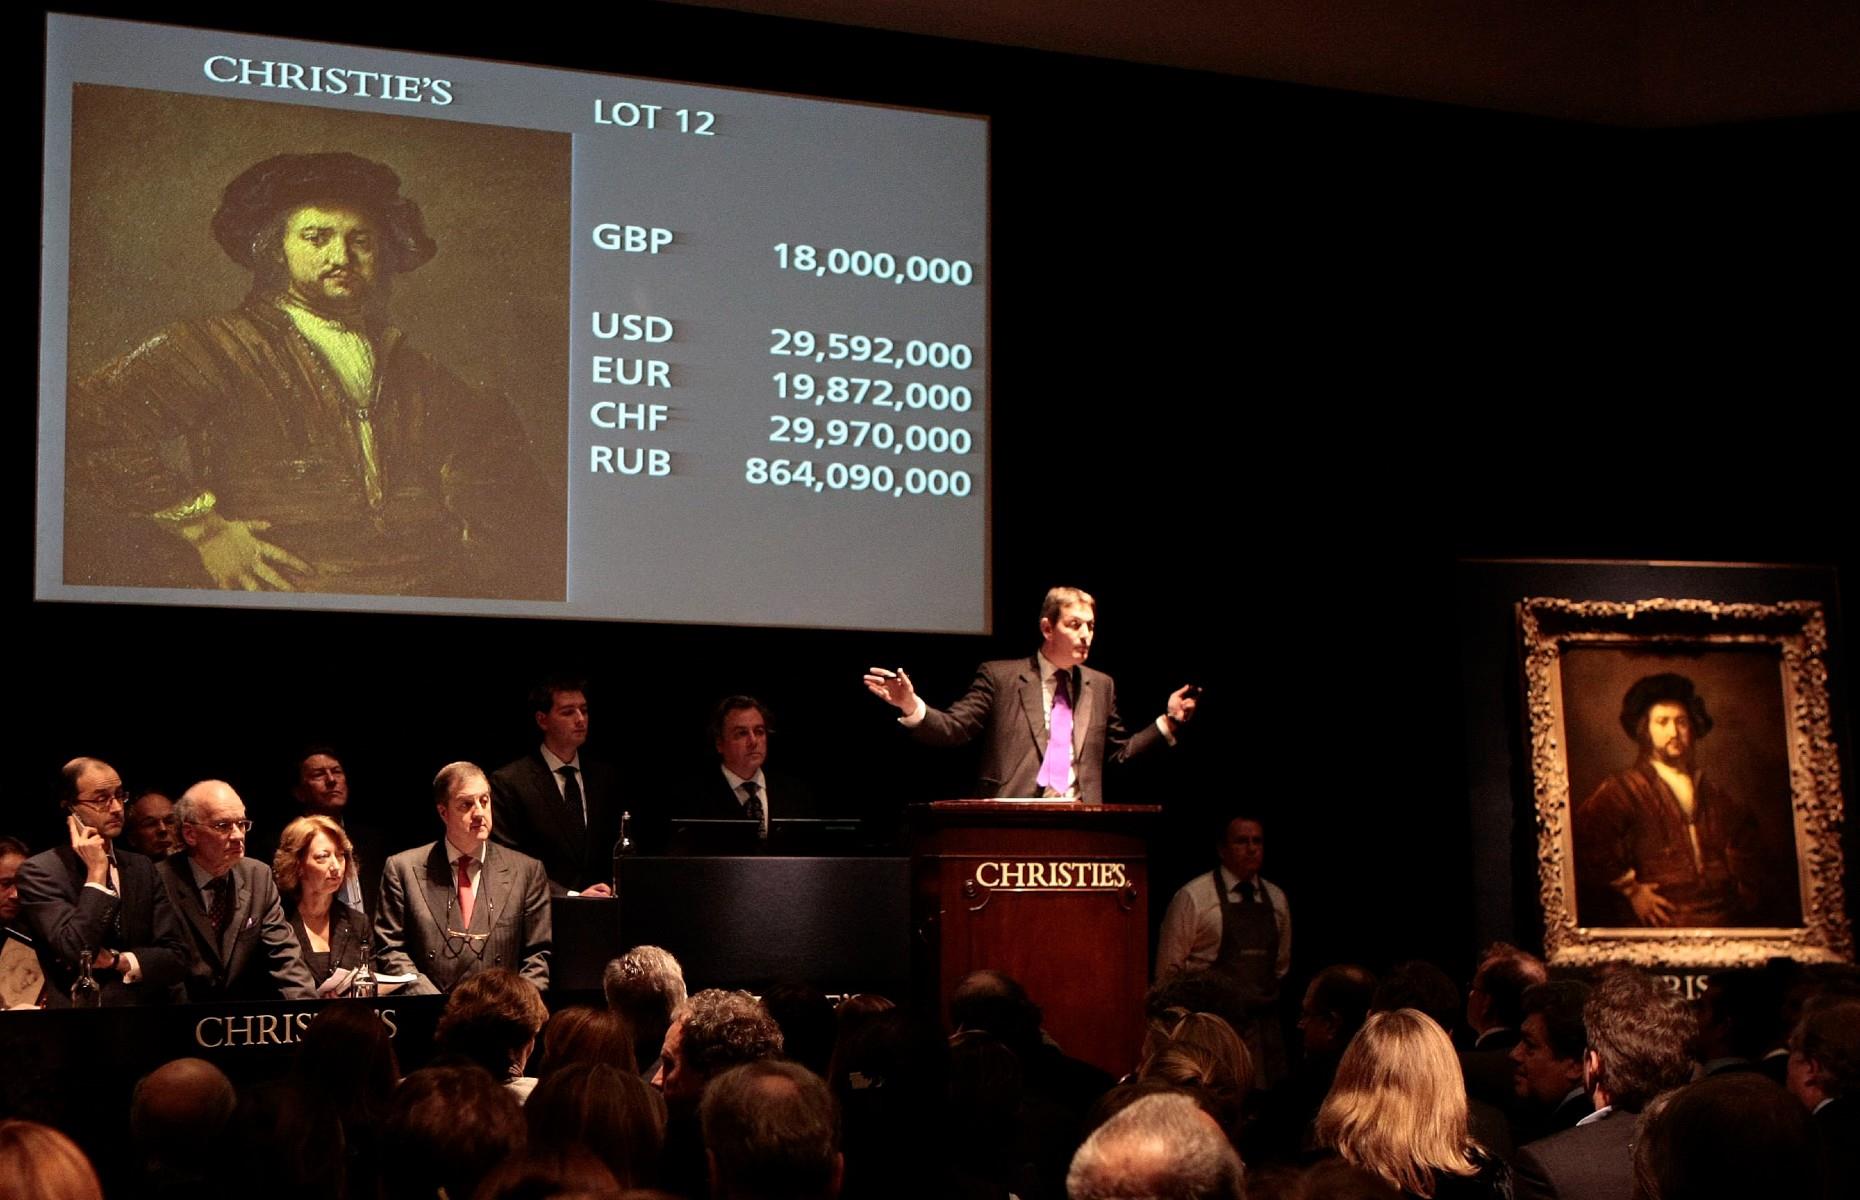 <p>The 'Hekking <em>Mona Lisa</em>' went on sale at the Christie Auction house in Paris in June. Despite the fact the painting is not the real deal, it was still expected to sell for an impressive €300,000 ($365,645/£257,800). However, following a frantic bidding war it sold for €2.9 million ($3.4m/£2.45m), nearly 10 times its estimate and a world record for a fake <em>Mona Lisa</em>. But there's another <em>Mona Lisa </em>that many have claimed to be a true da Vinci...</p>